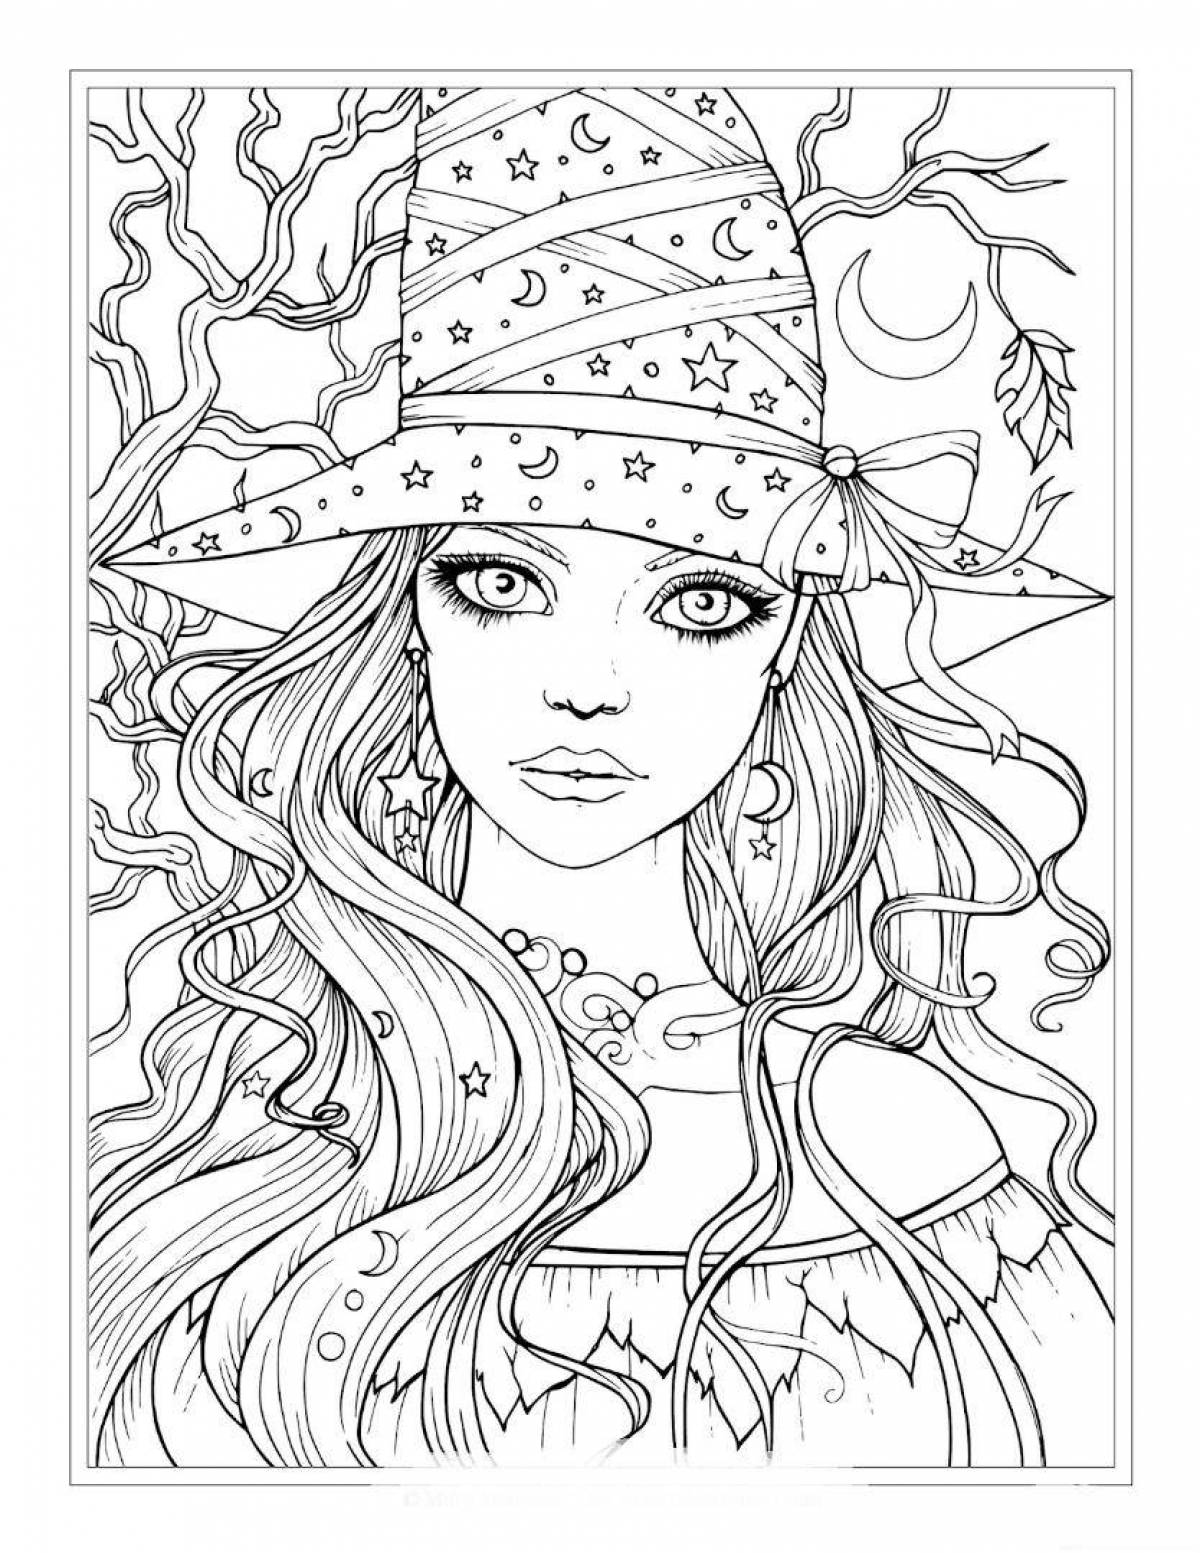 Creative coloring book for 18 year old girls